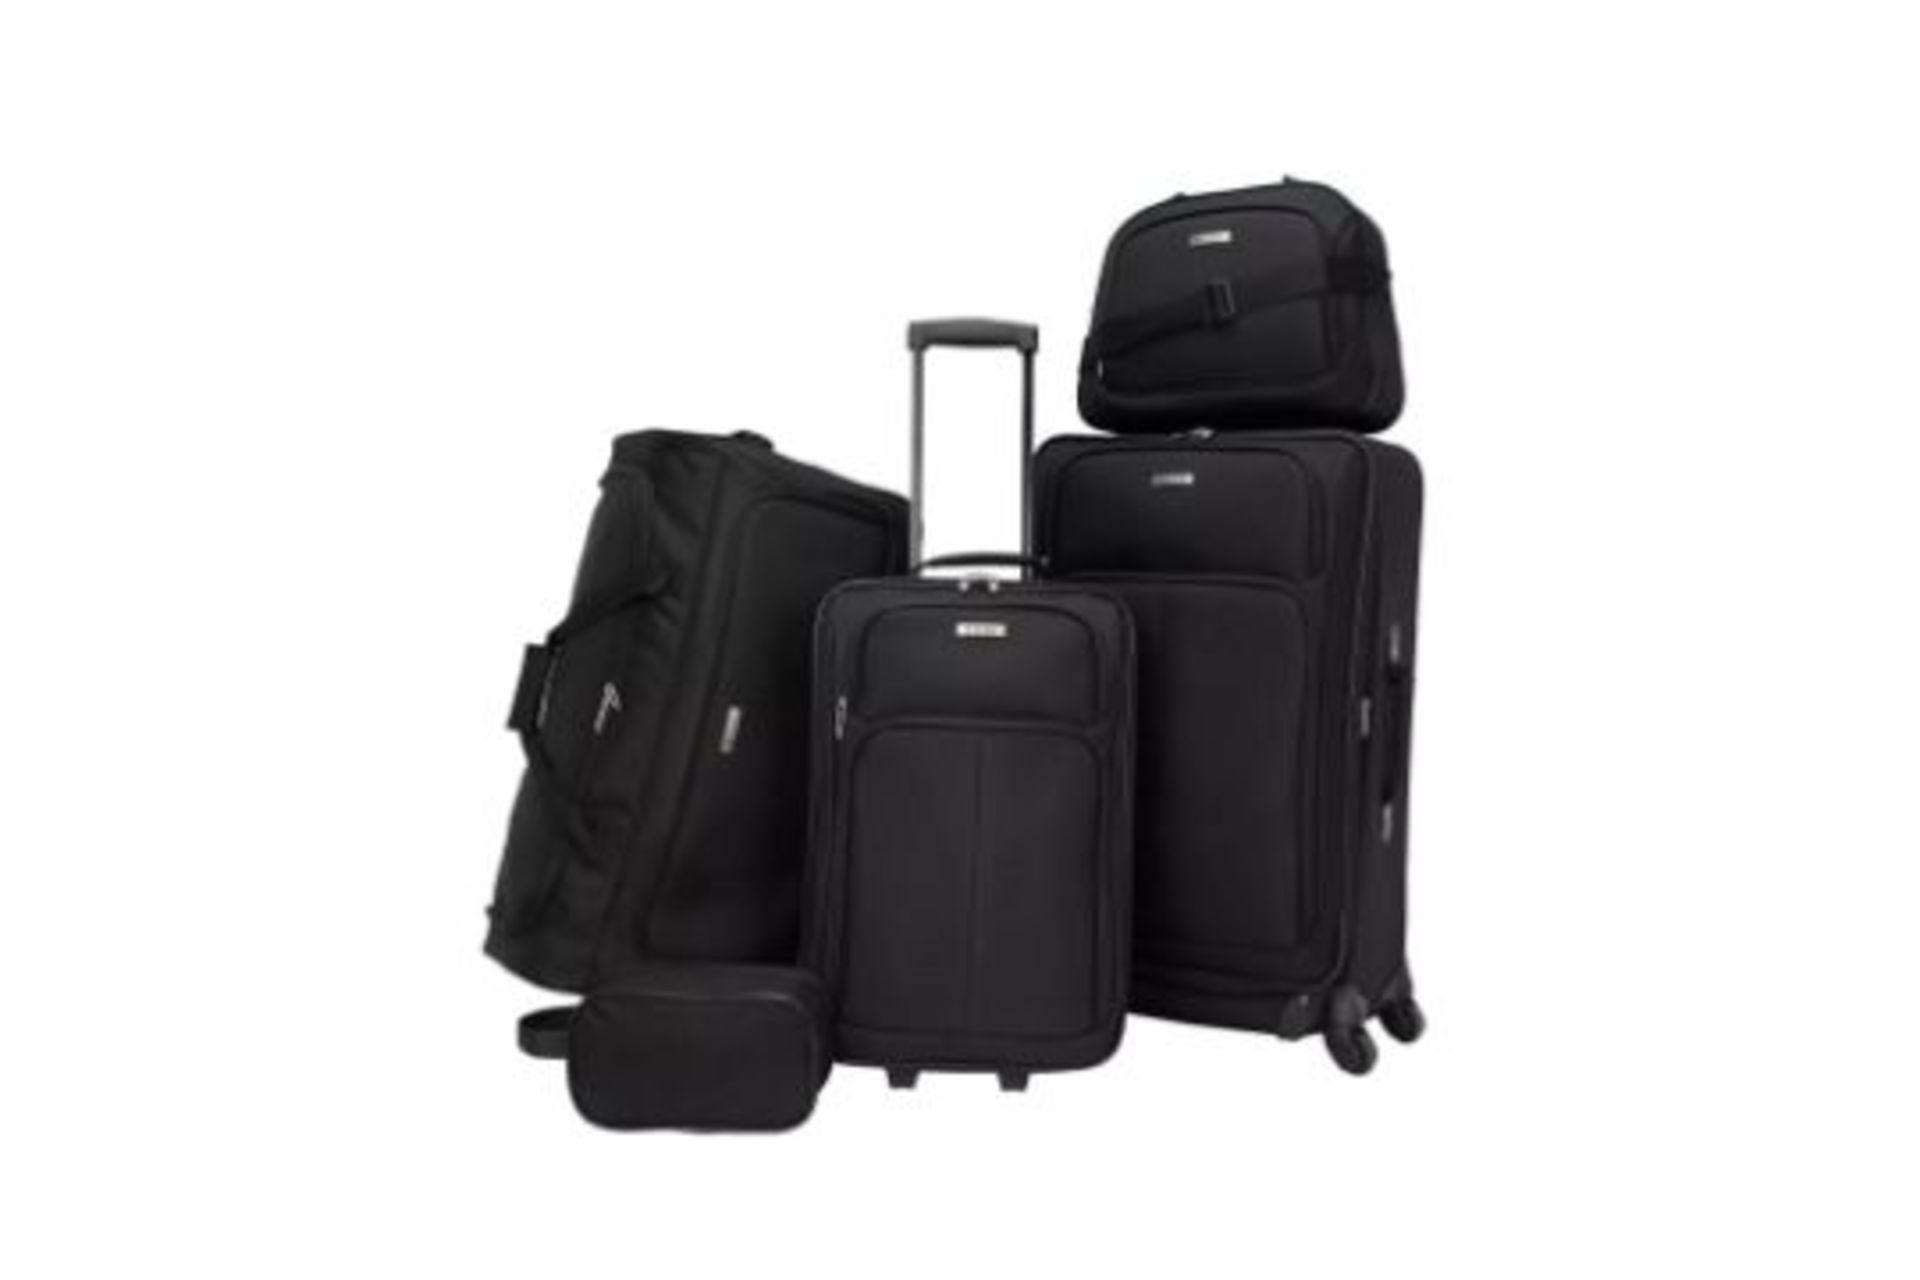 New Set OF TAG Ridgefield Black 5 Piece Softside Luggage Set. RRP $300. This classic set from Tag